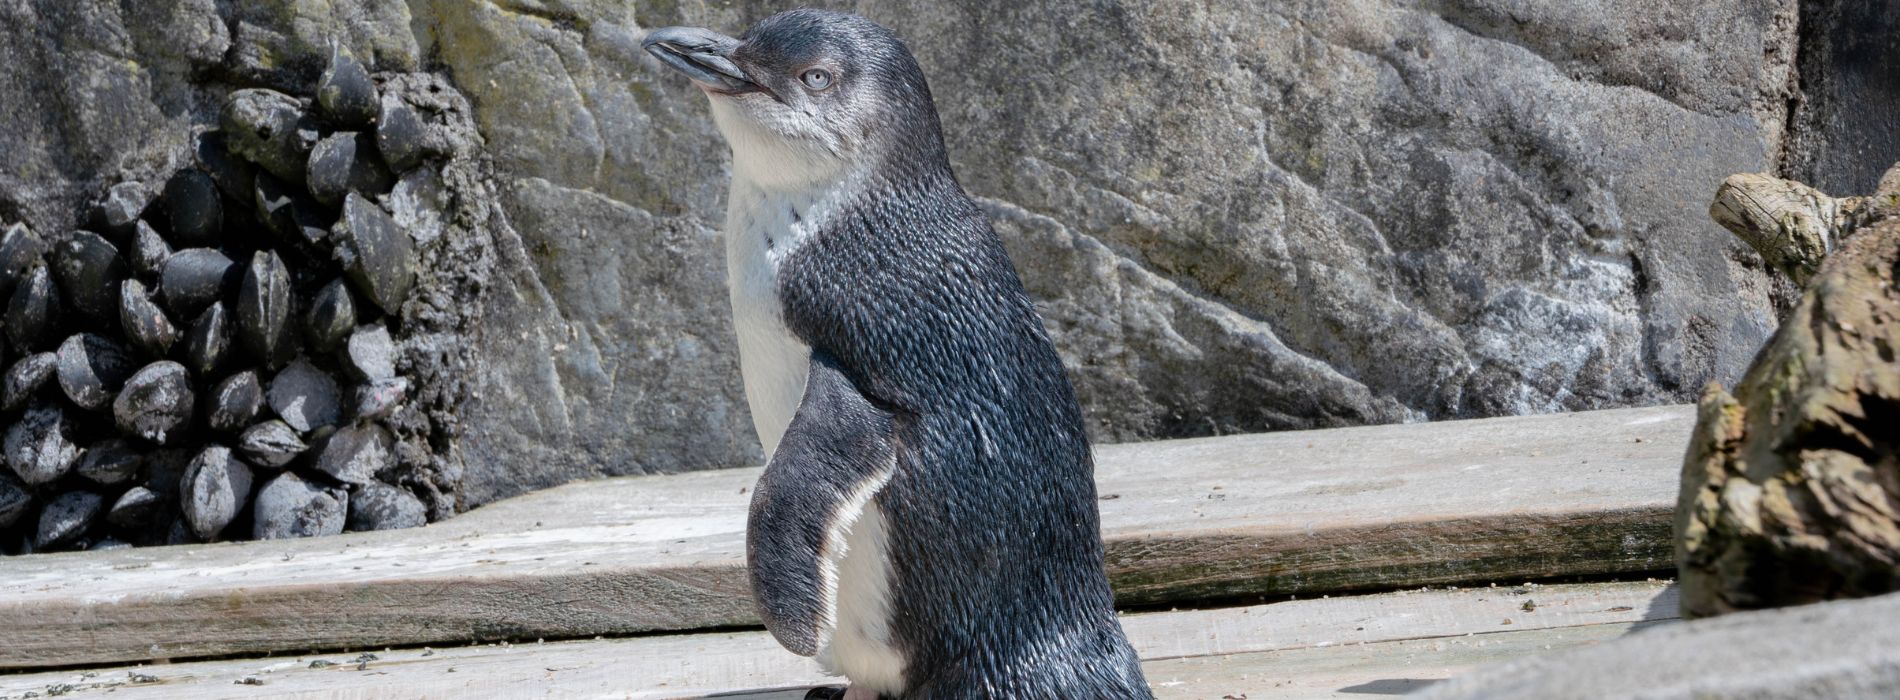 Fairy Penguin Biography: The Playful Life of the Smallest Penguin on Earth